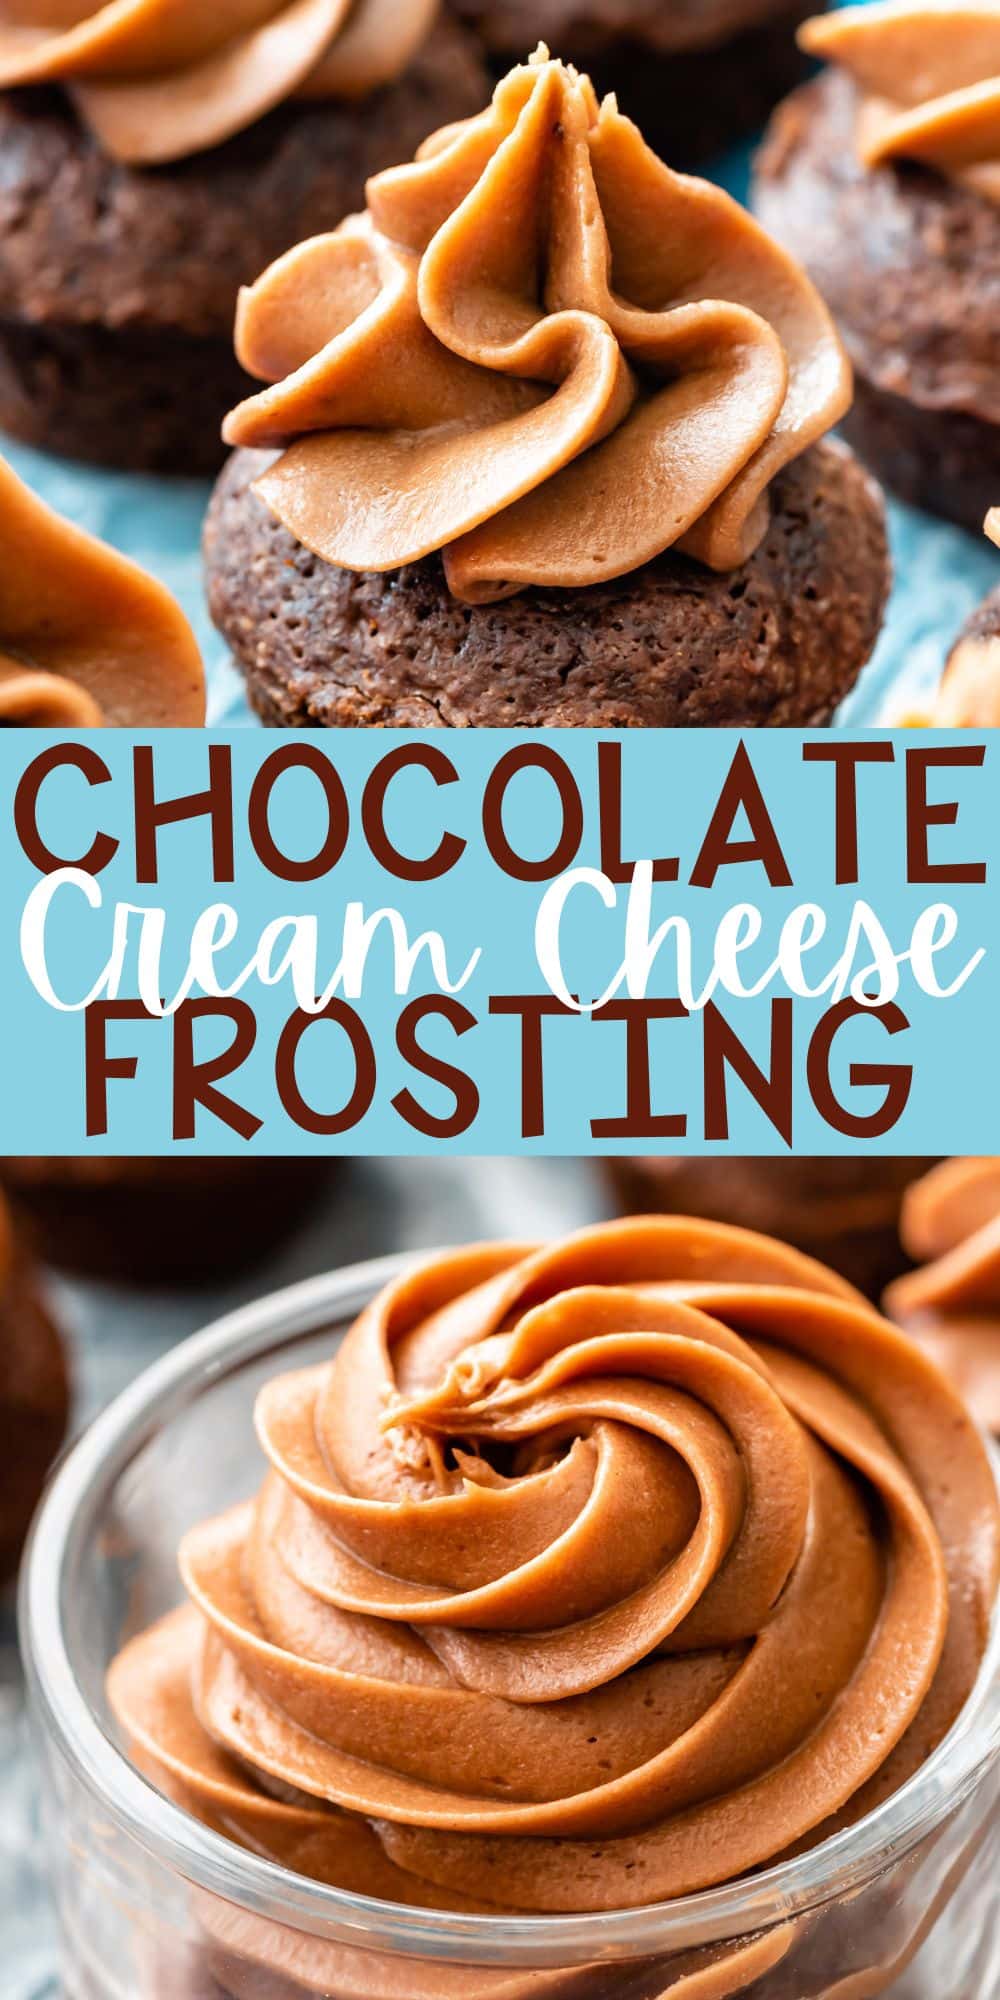 two photos of mini brownie bites with chocolate cream cheese frosting on top with words on the image.